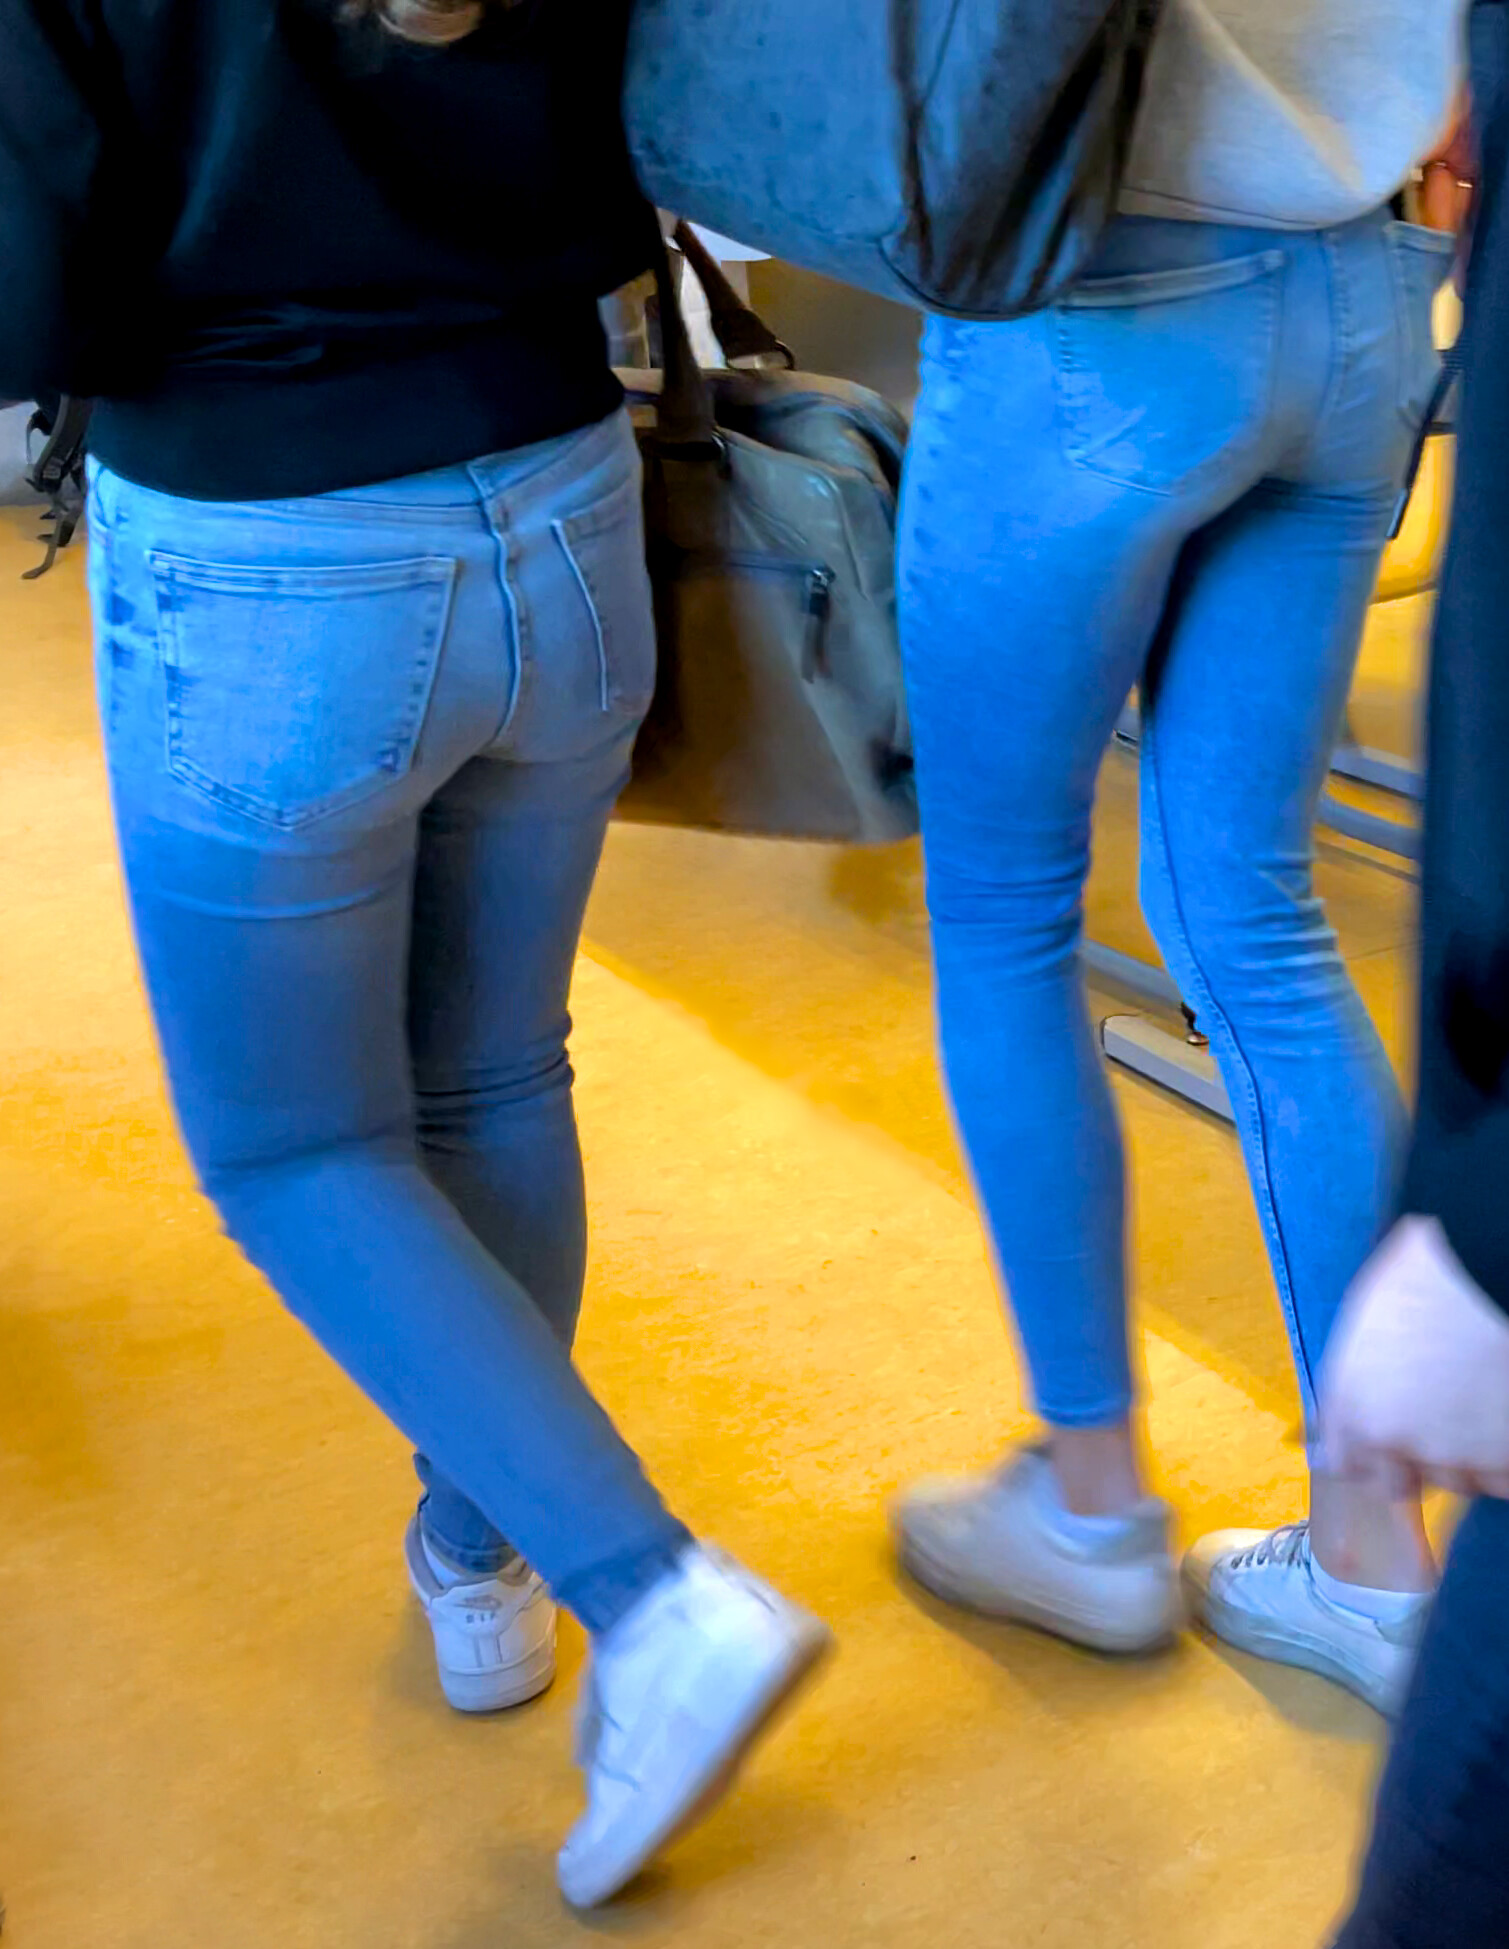 College teen girl candid ass in tight jeans.